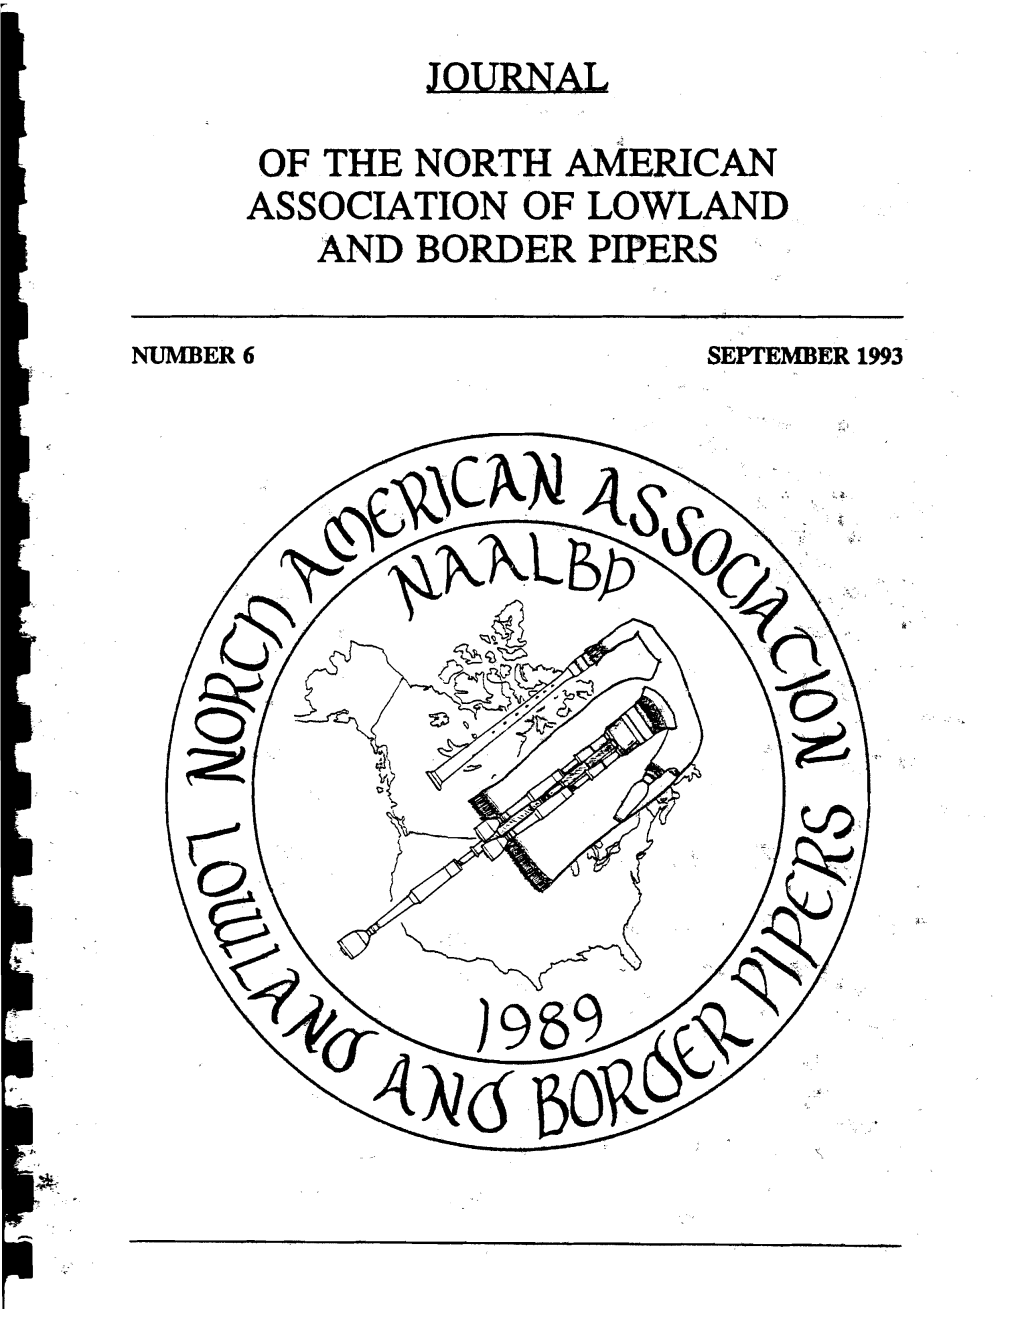 Of the North American Association of Lowland and Border Pipers'